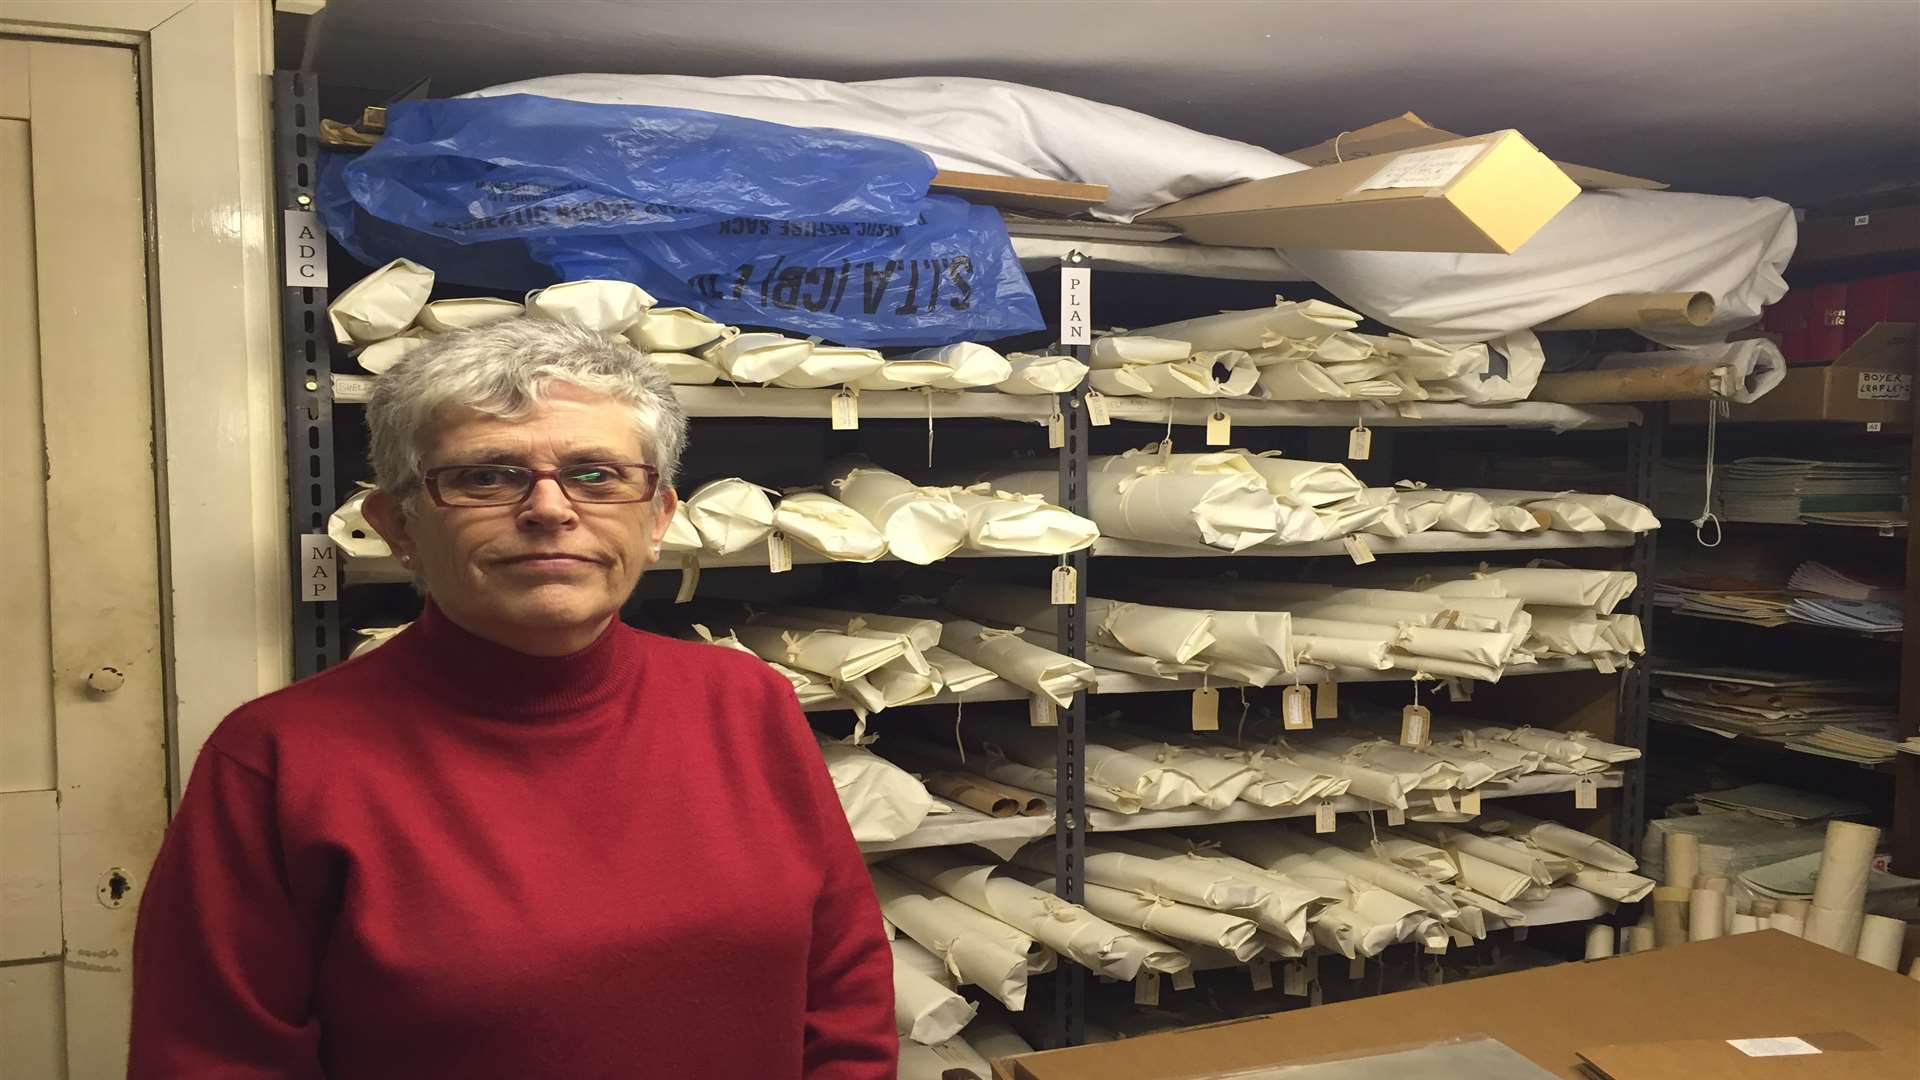 Linda hopes to attract more visitors to the museum